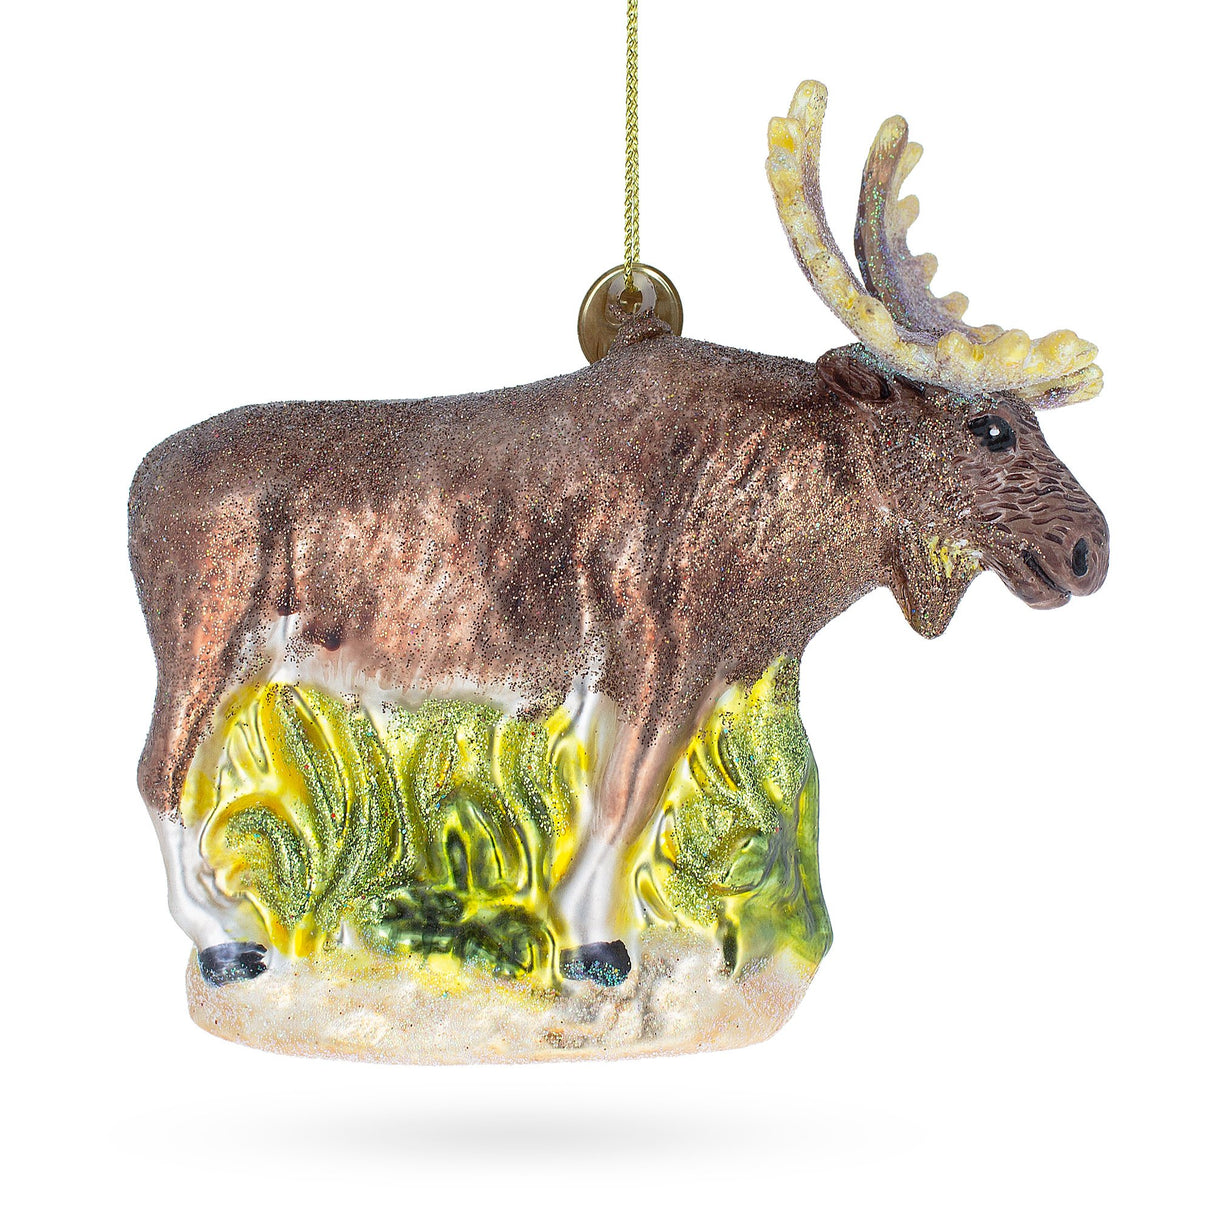 Glass Majestic Moose - Blown Glass Christmas Ornament in Brown color